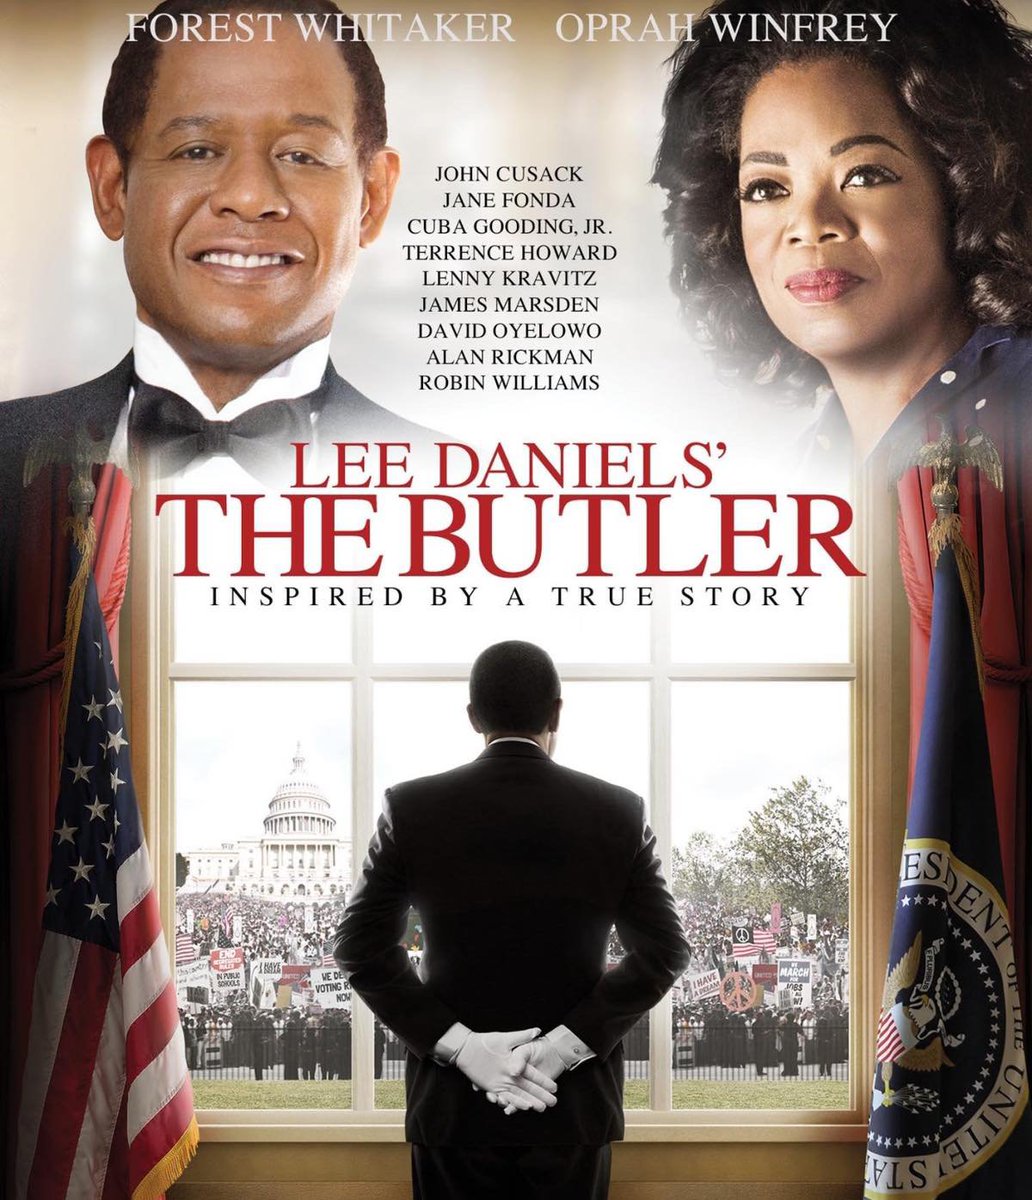 A look into the life of a man who served as a butler in the White House to multiple presidents for many years. Through the countless events and issues that happened to the country as he does everything to keep his family safe as well from harm.
#TheButler #forestwhitaker